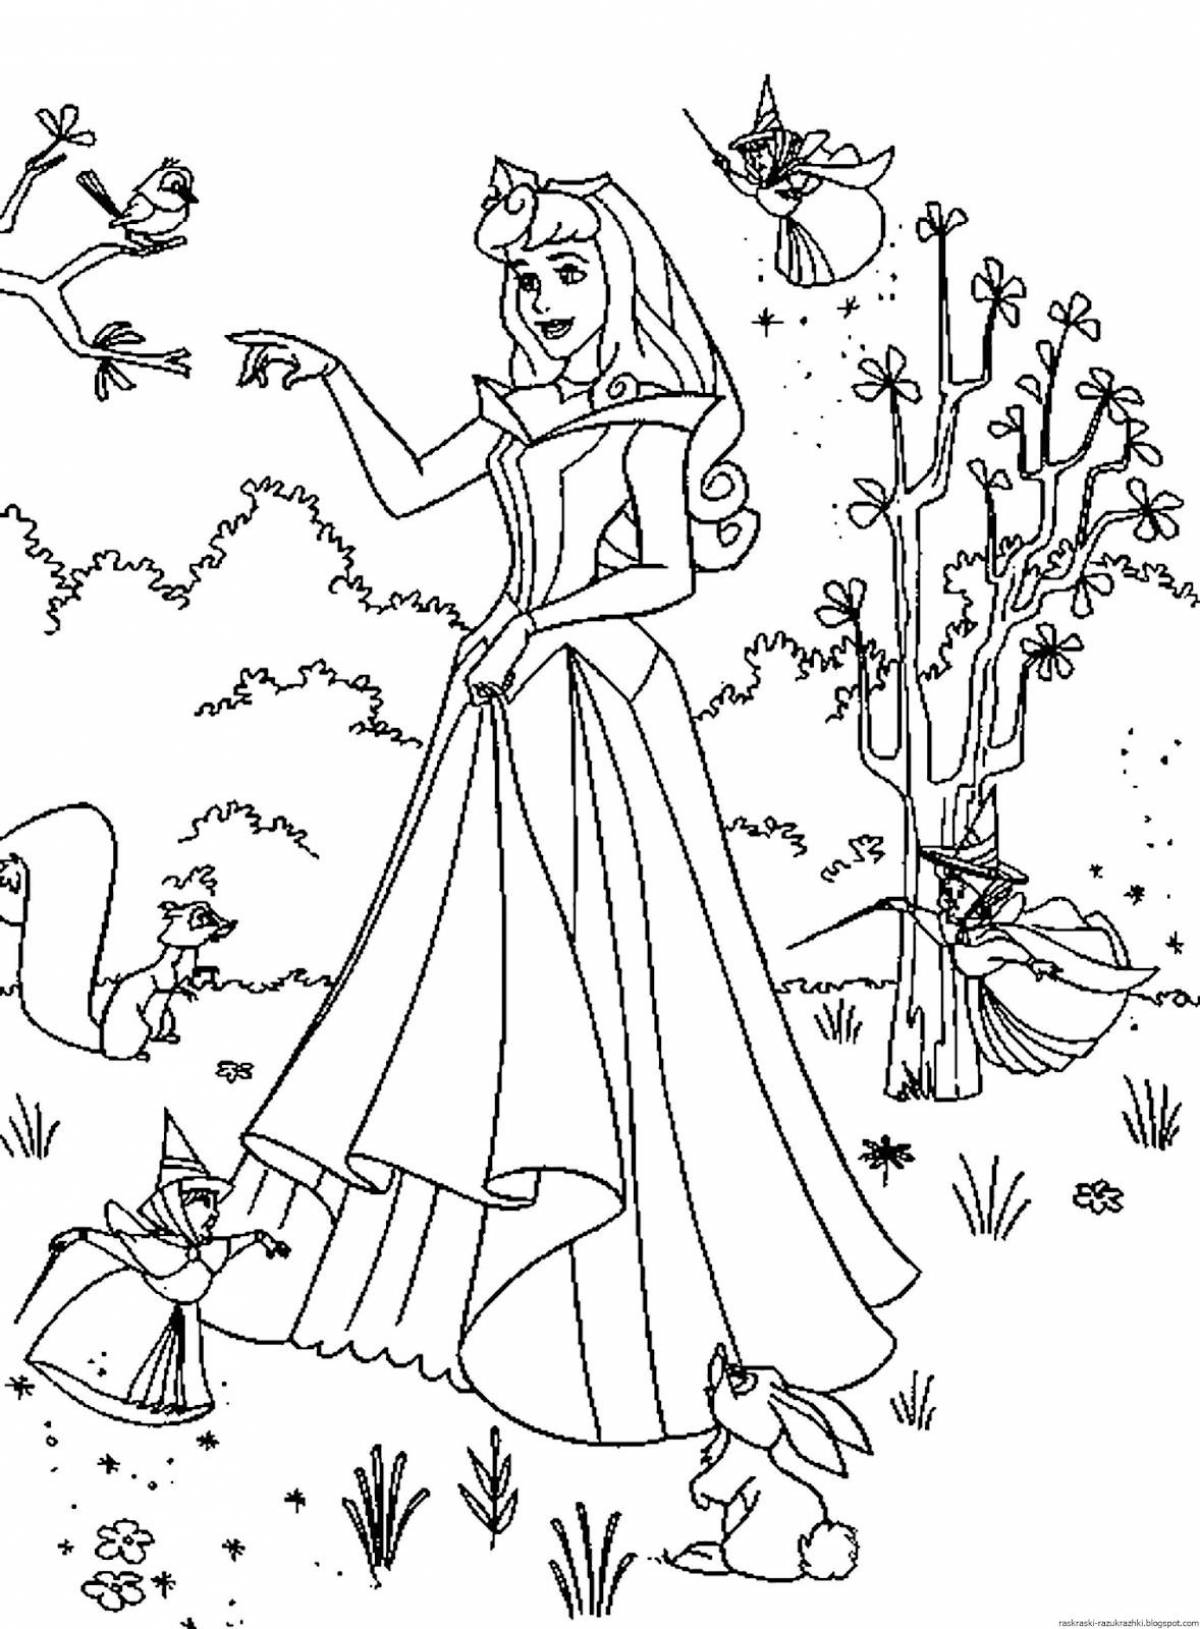 Glowing aurora coloring page